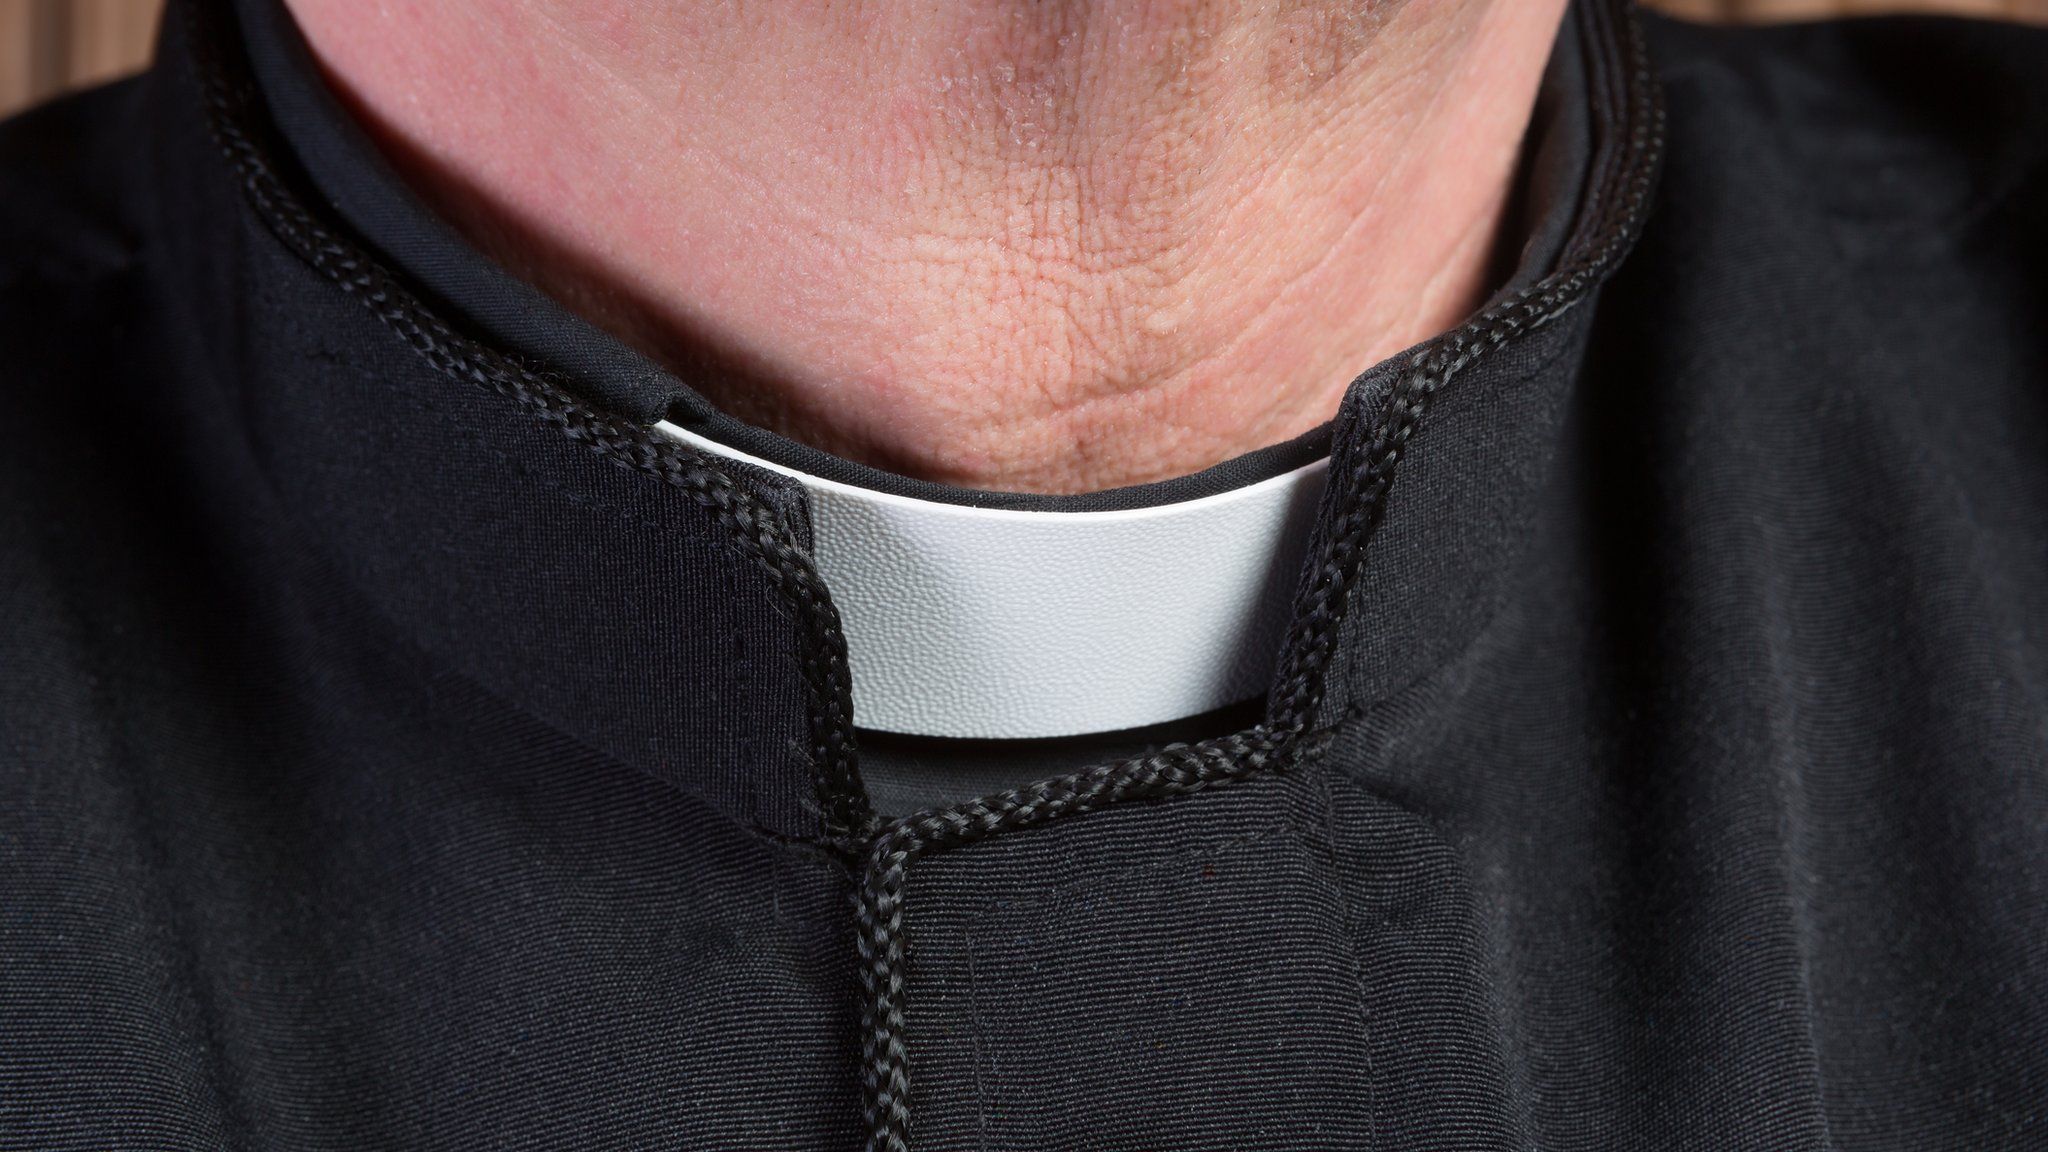 Image shows close-up of the neck of a priest wearing a black shirt with cassock and white clerical collar